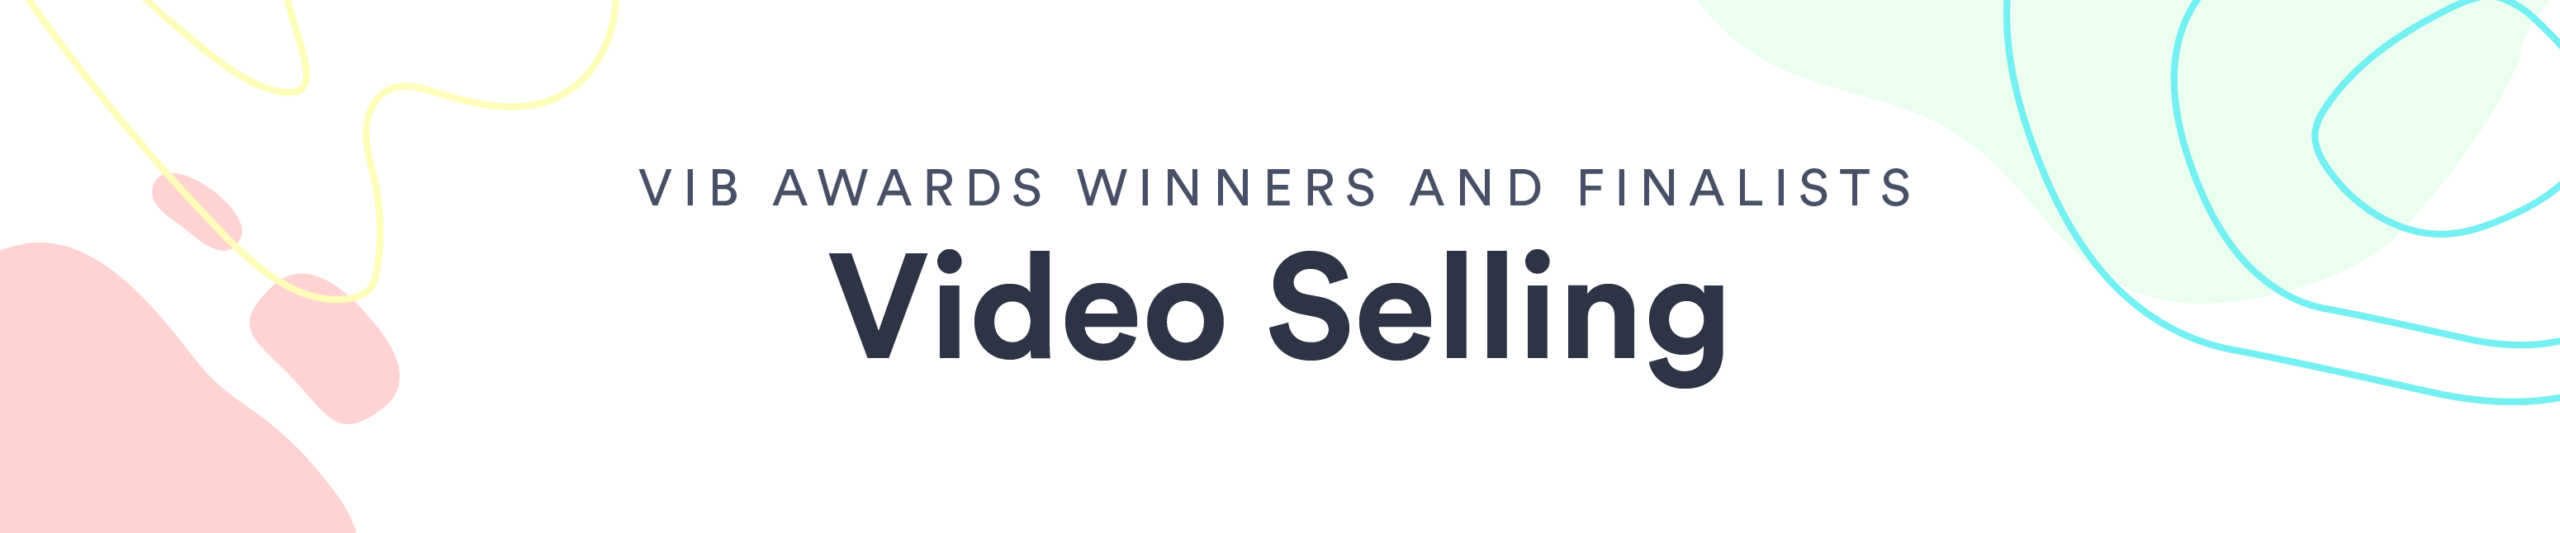 Video in Business Awards: Video in Sales Winners and Finalists